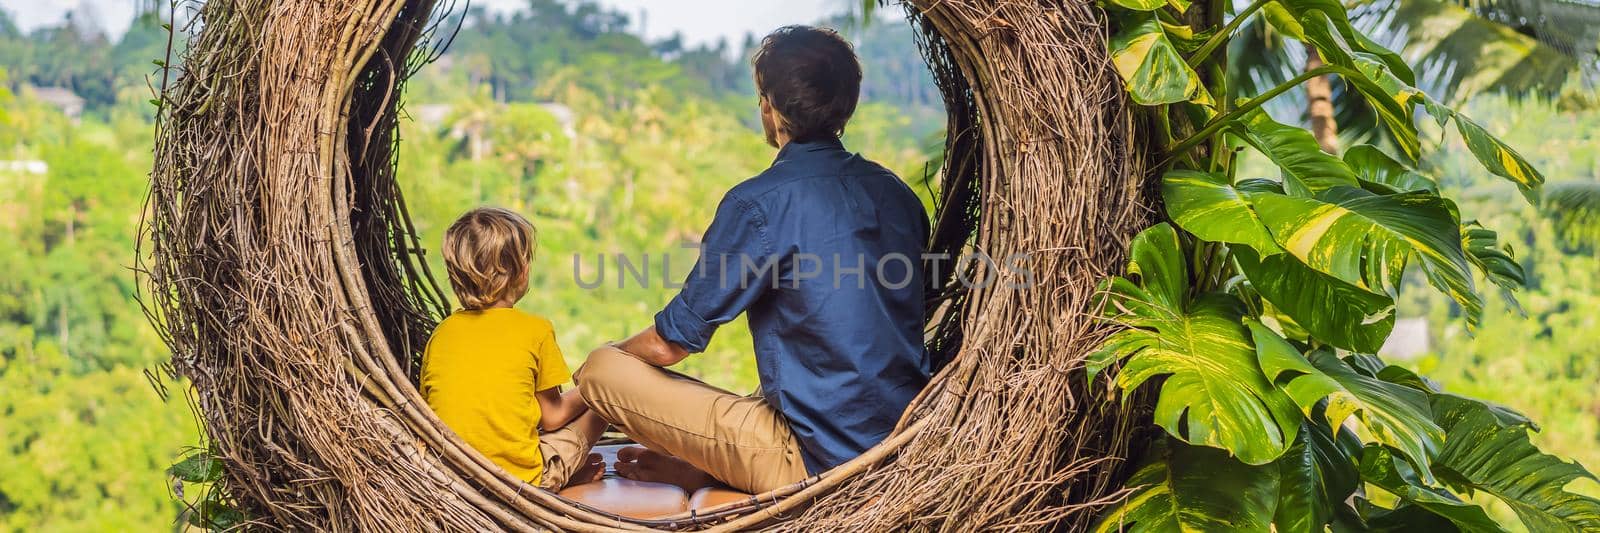 BANNER, LONG FORMAT Bali trend, straw nests everywhere. Child friendly place. Happy family enjoying their travel around Bali island, Indonesia. Making a stop on a beautiful hill. Photo in a straw nest, natural environment. Lifestyle. Traveling with kids concept. What to do with children.